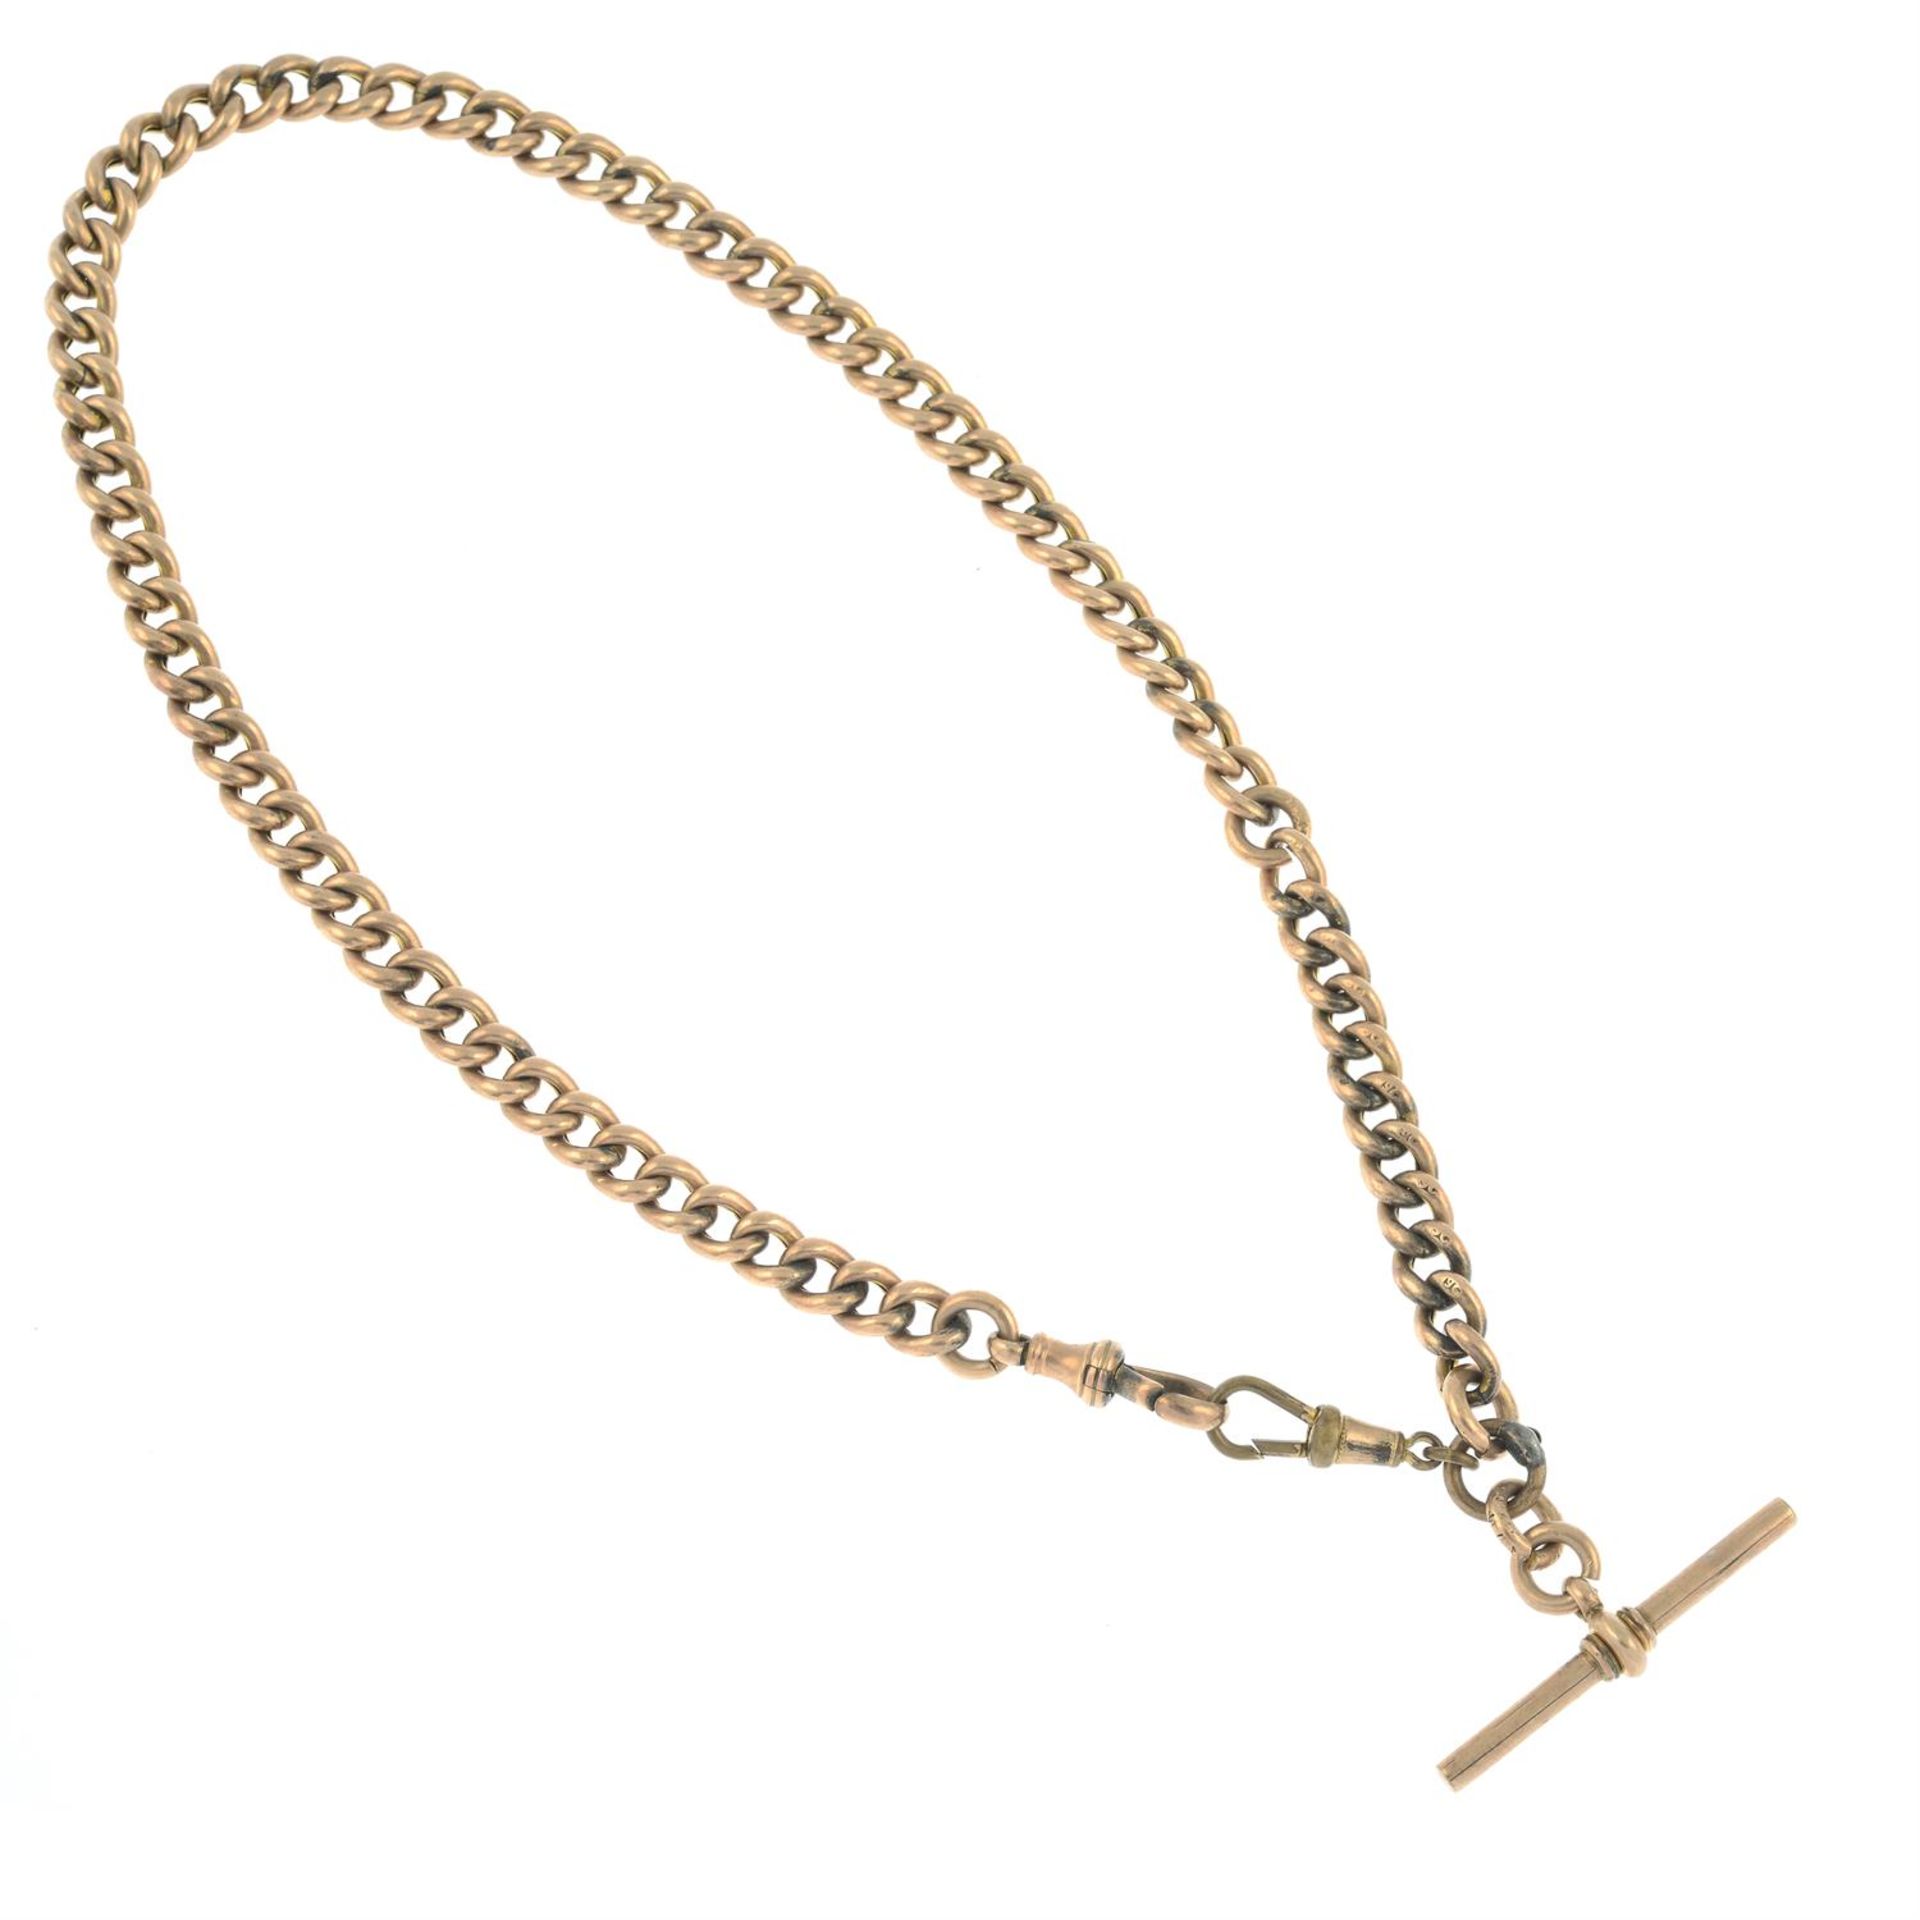 An early 20th century 9ct gold Albert chain, with T-bar.